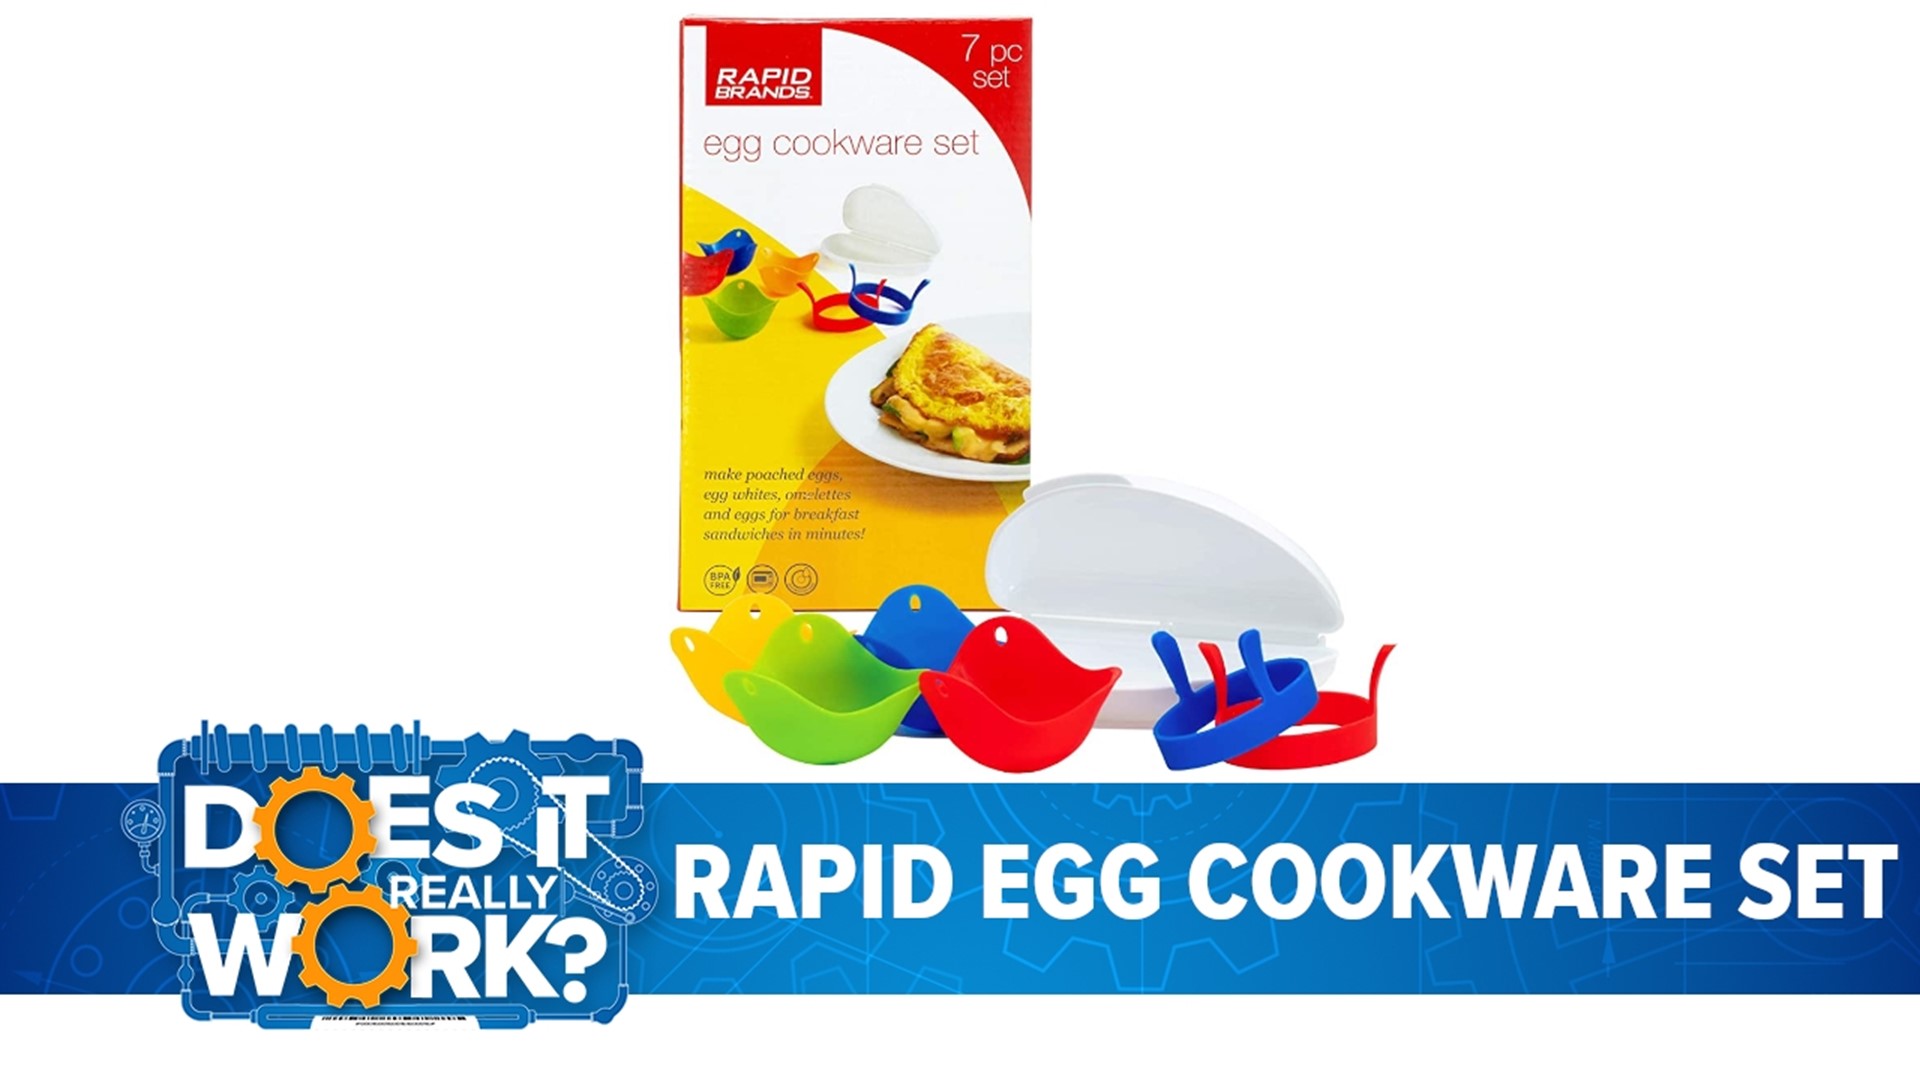 The maker claims it's the fastest and easiest way to cook eggs.